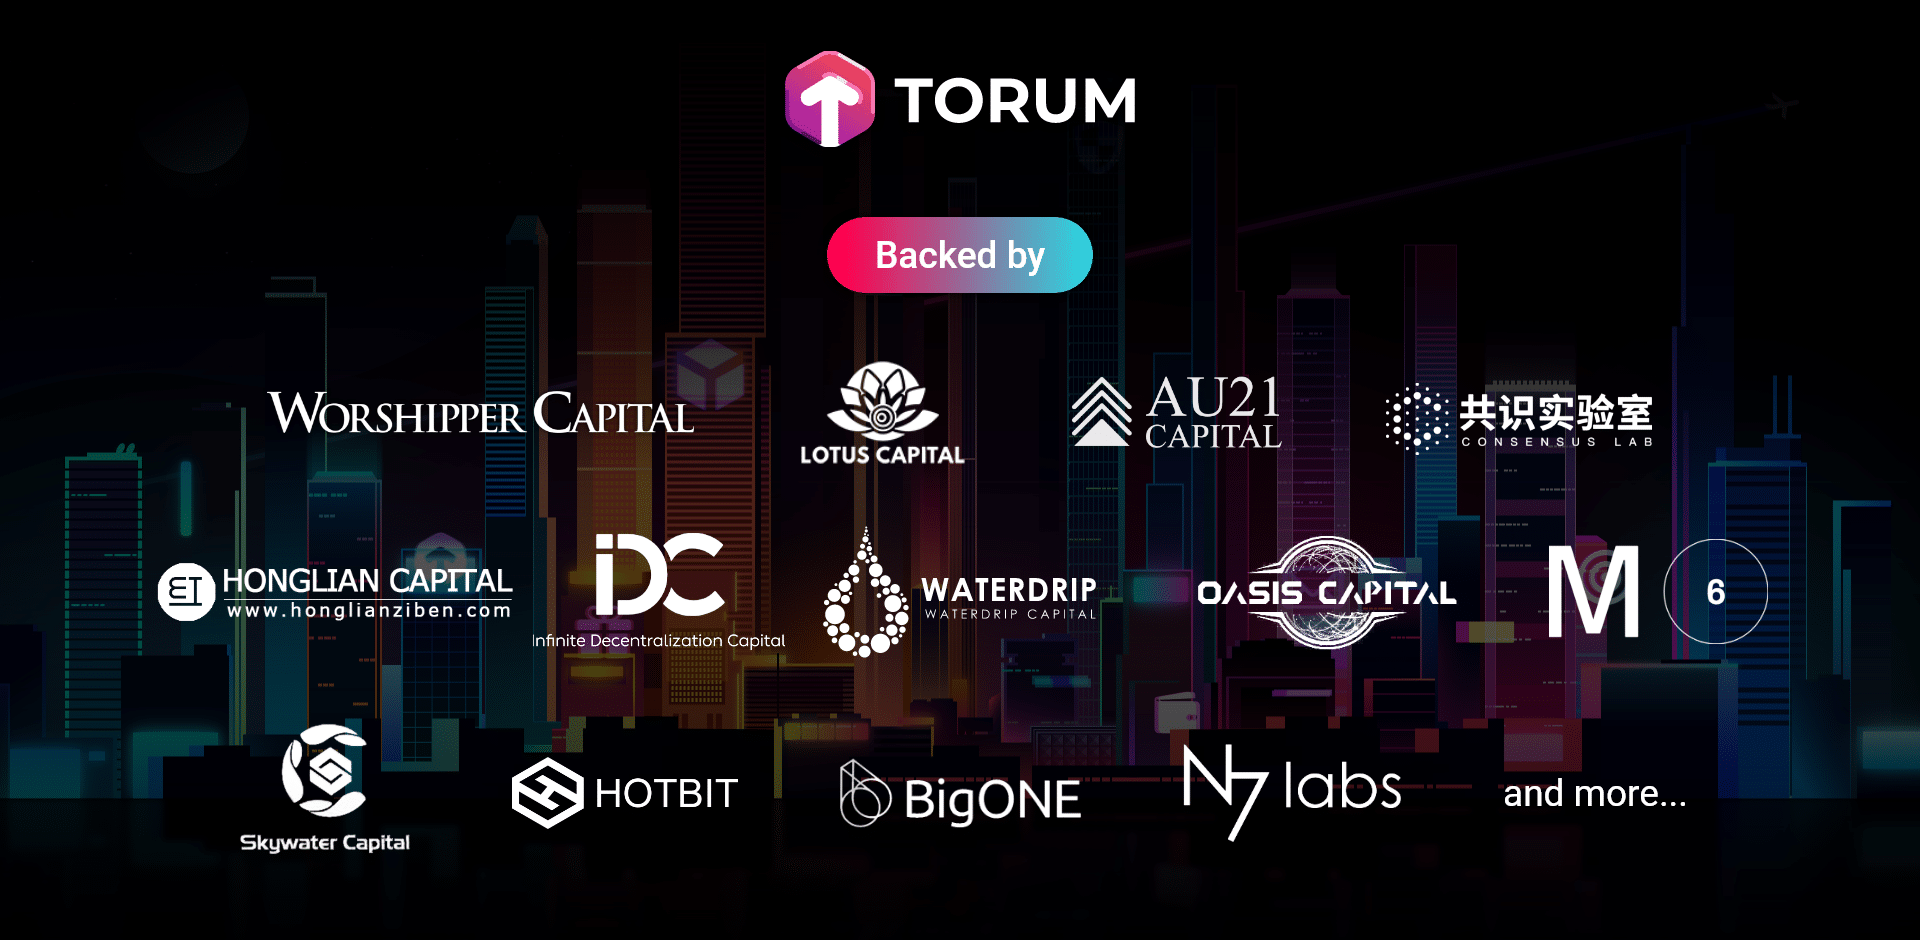 Torum Completed The World’s First Initial Staking NFT Offering In Under 20 Minutes  - 2